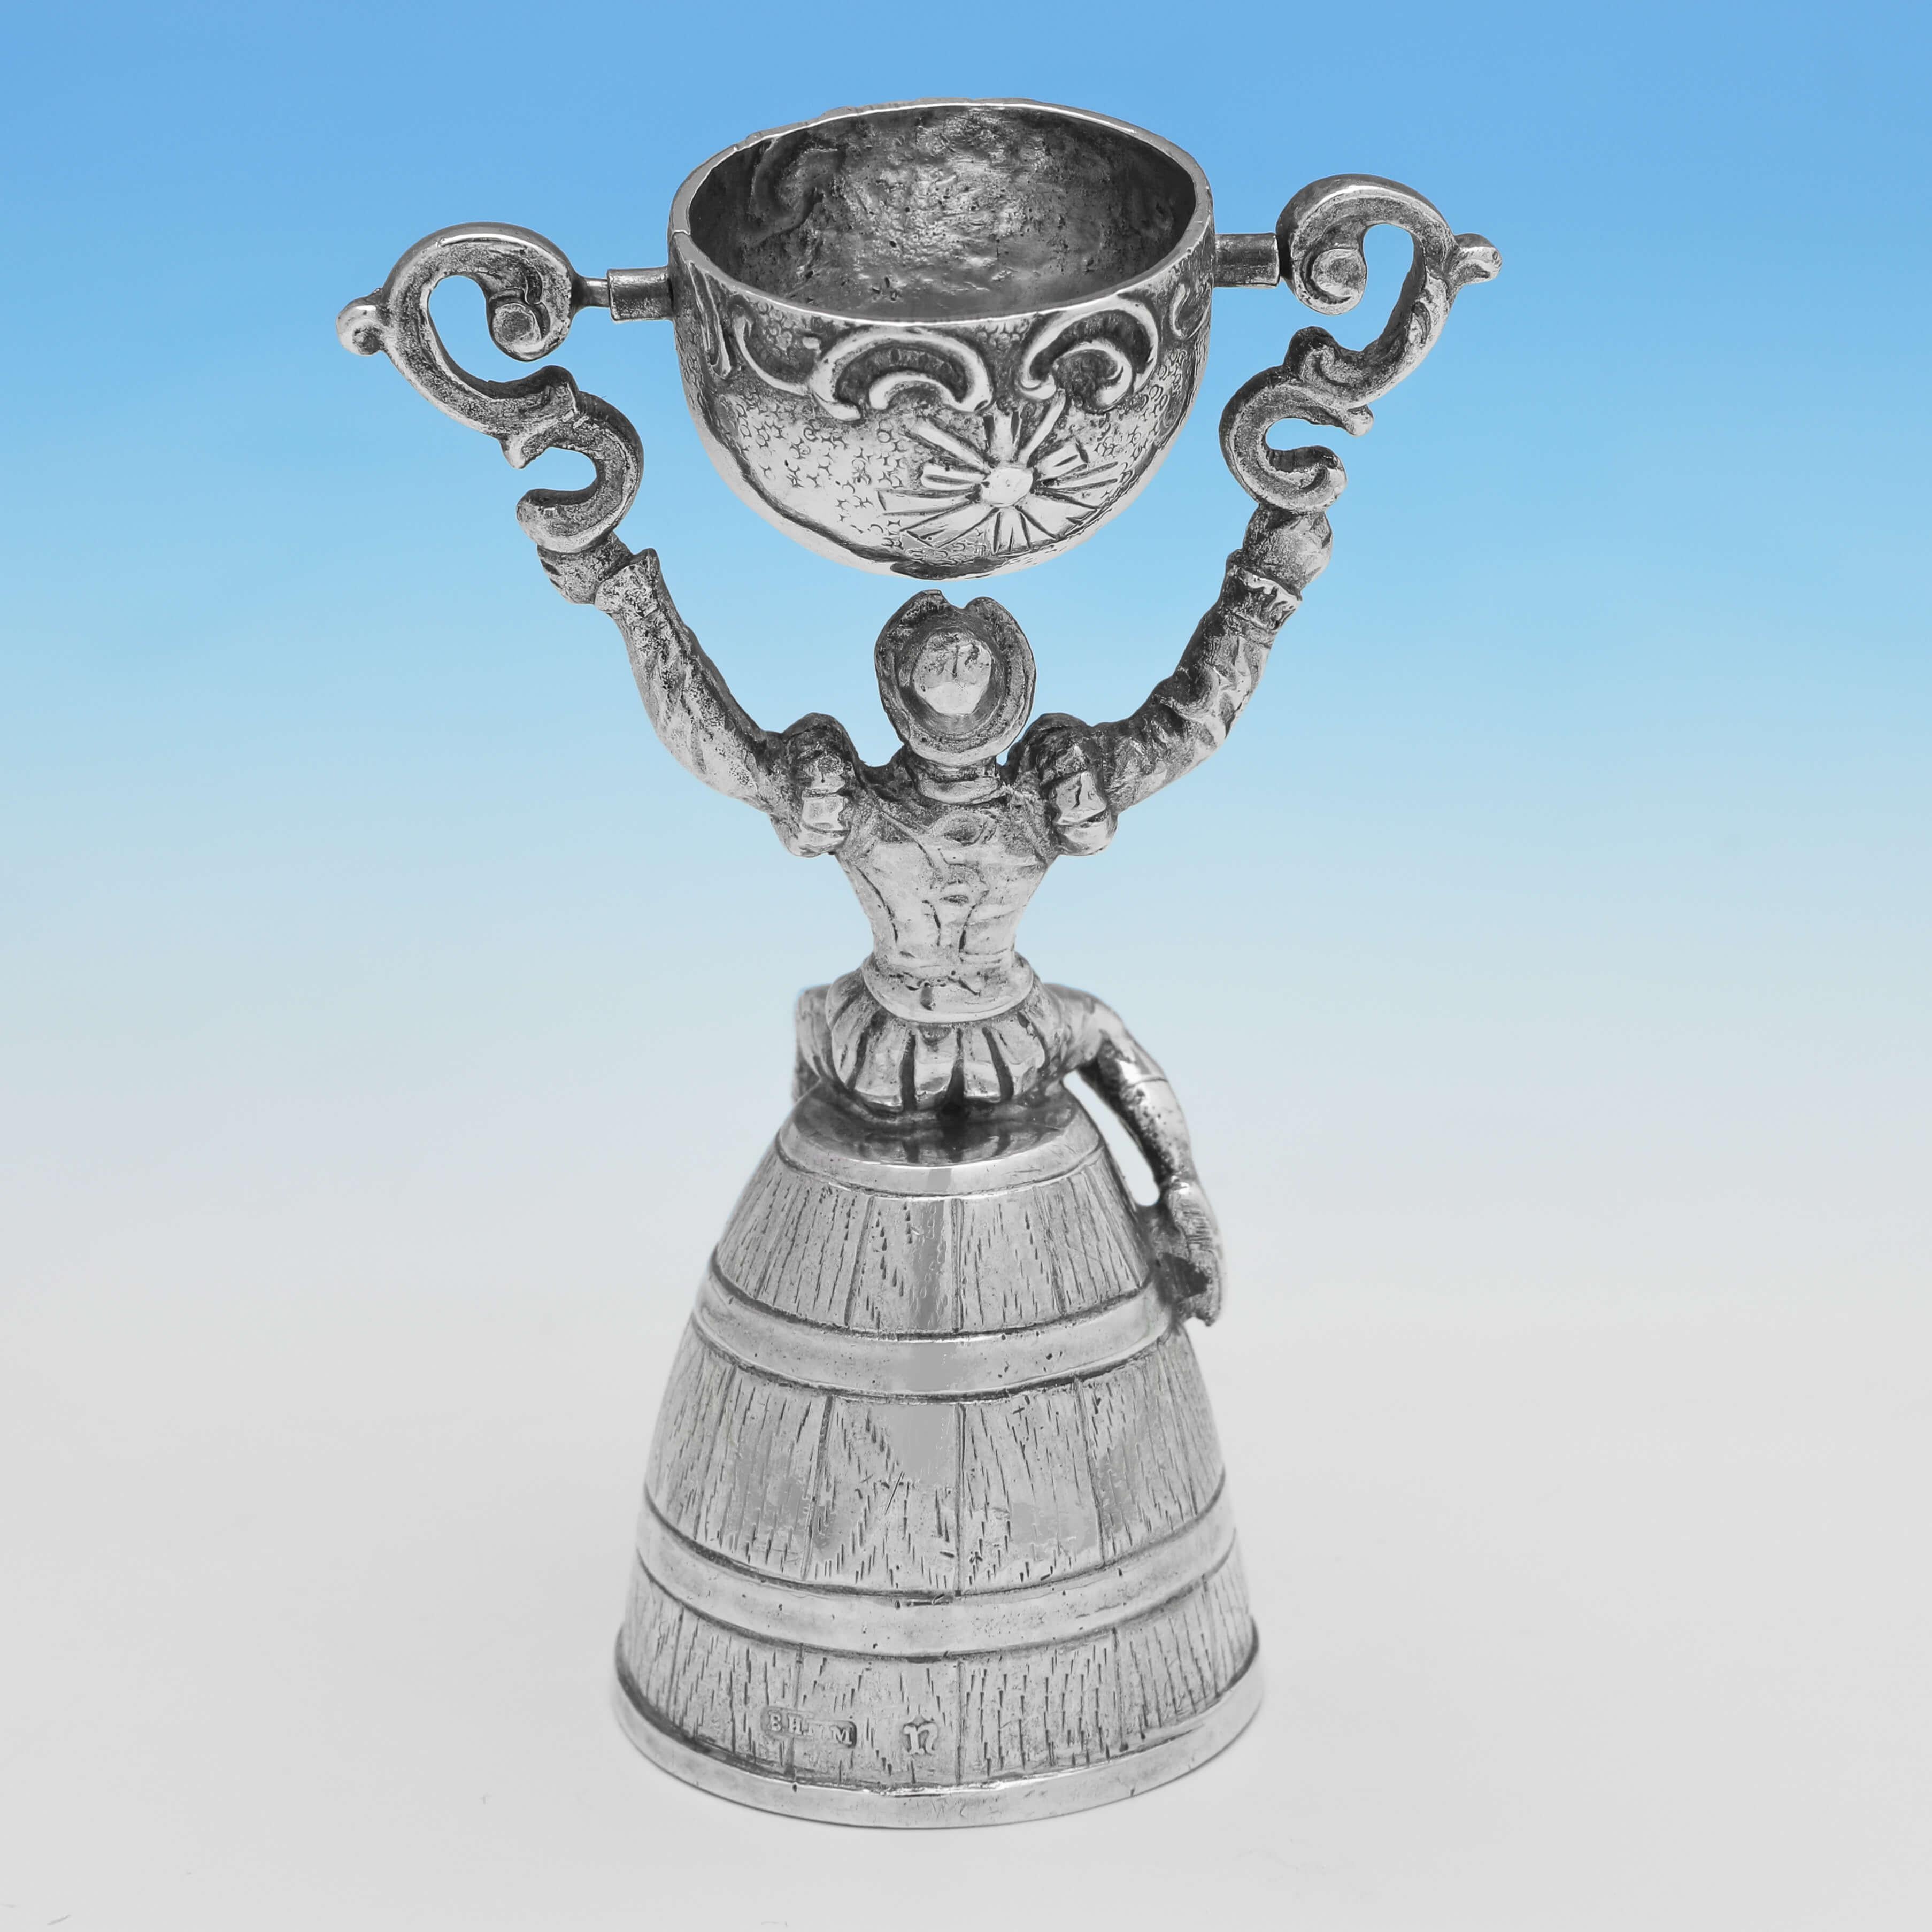 Carrying import marks for London in 1912 by Berthold Muller, this handsome, Antique Sterling Silver Wager Cup, is modelled as a Gentleman siting on a beer barrel. The wager cup measures 3